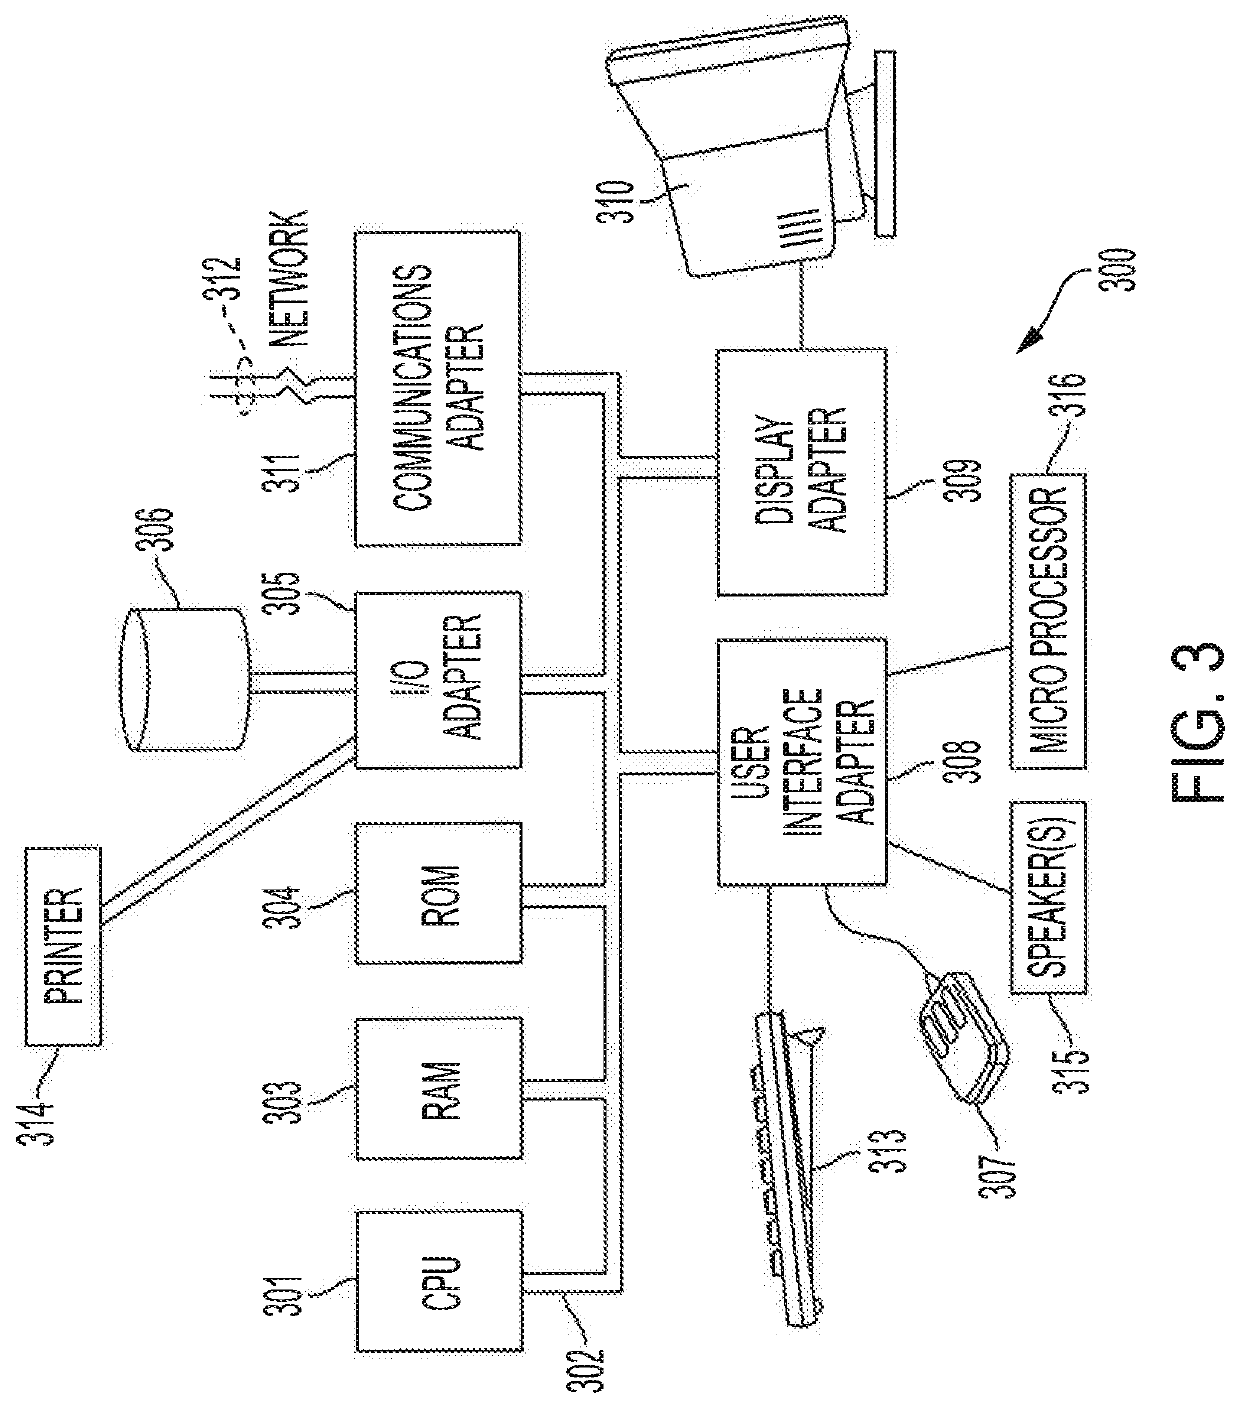 Iterative multi-directional image search supporting large template matching